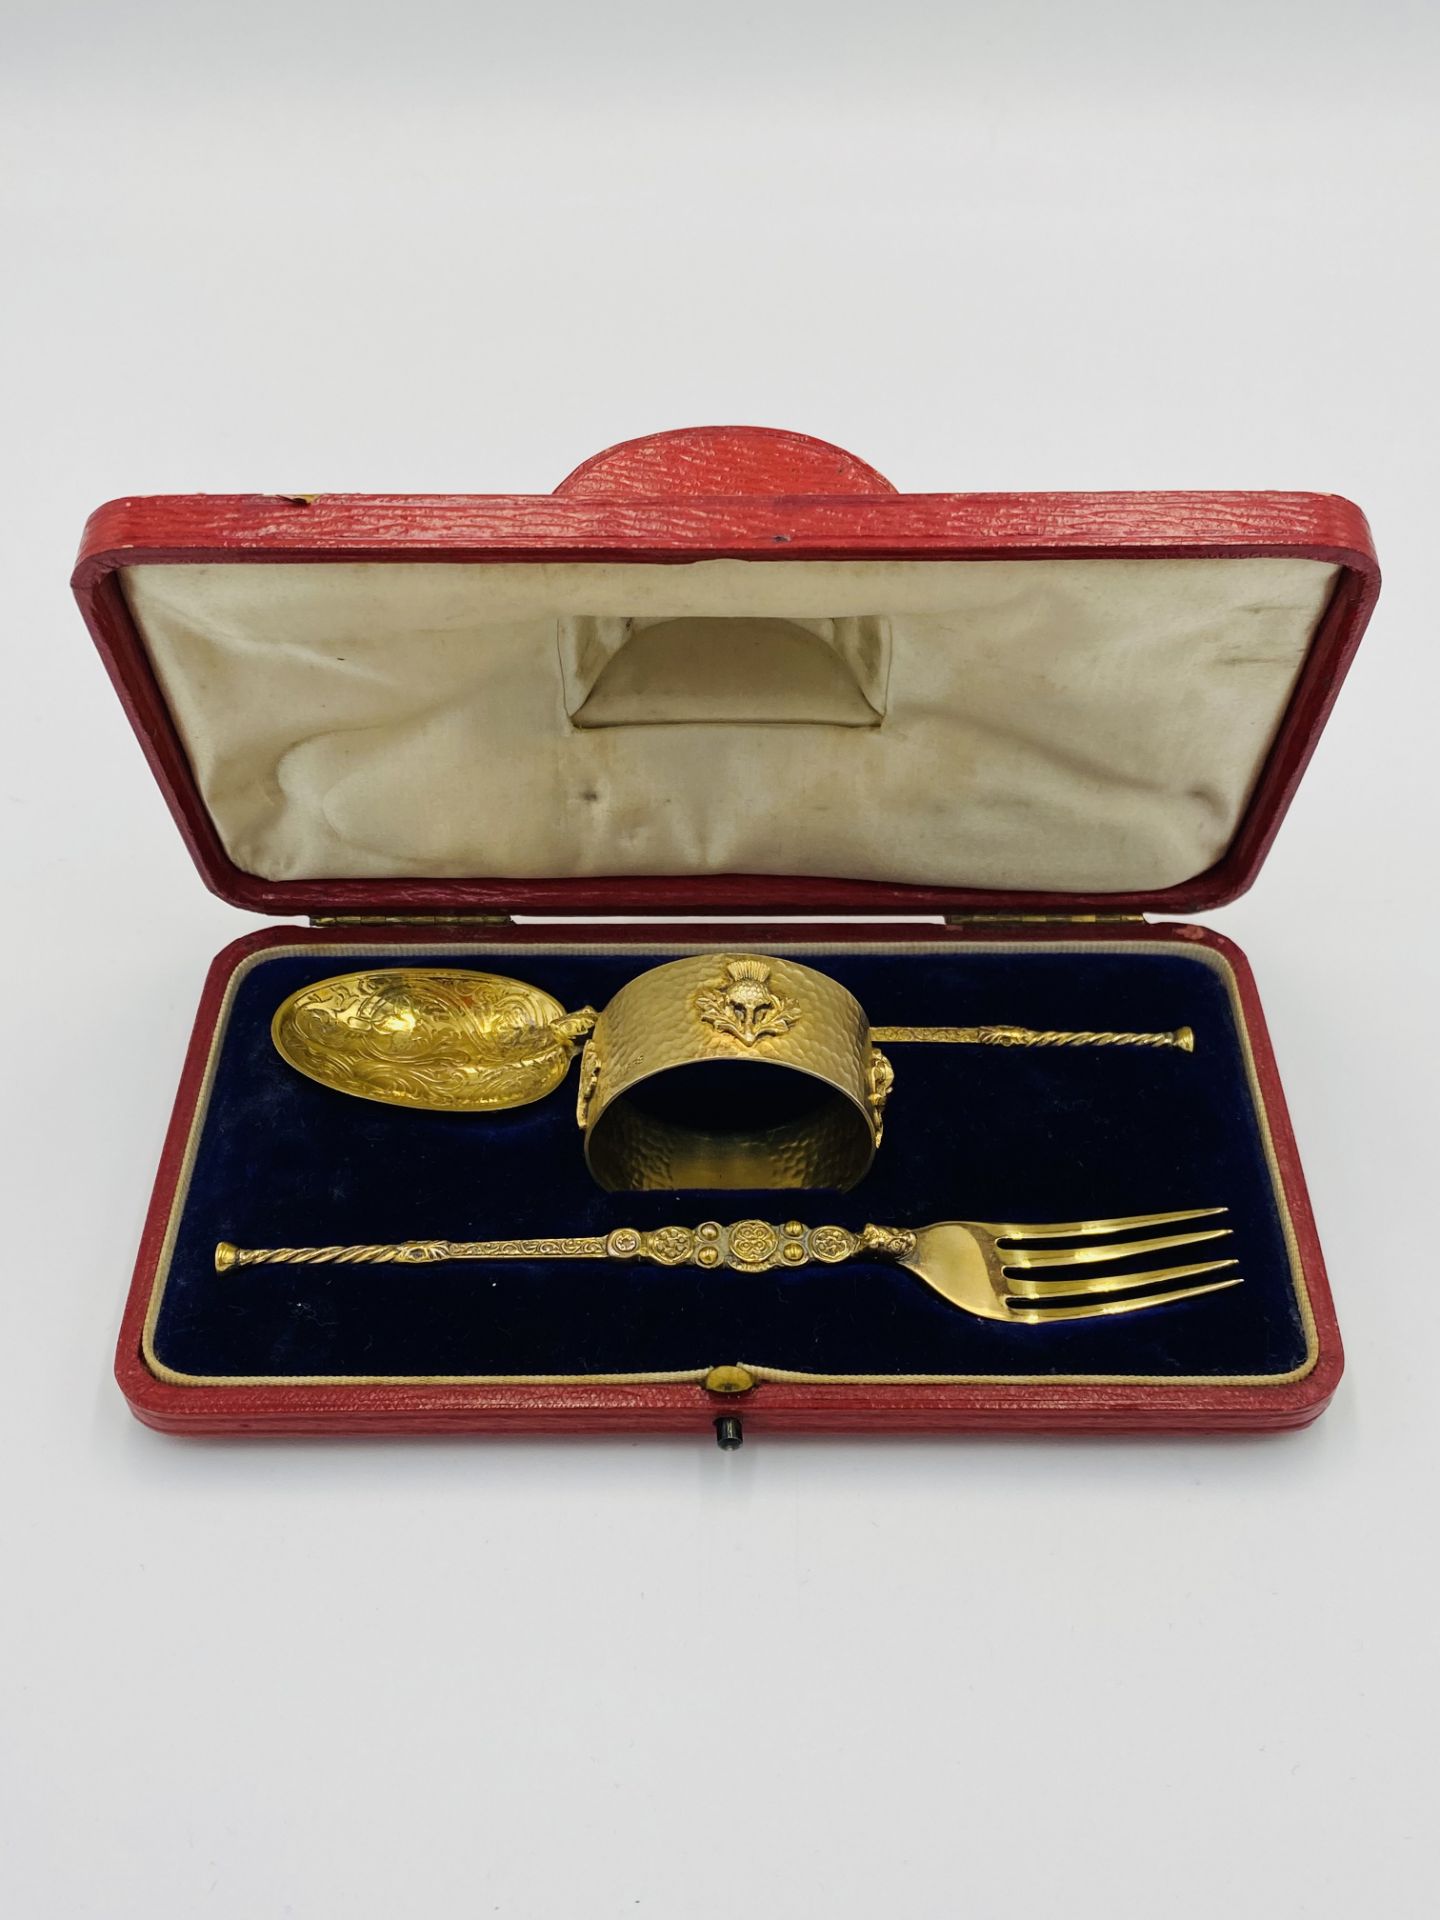 Silver gilt anointing set in box - Image 2 of 7